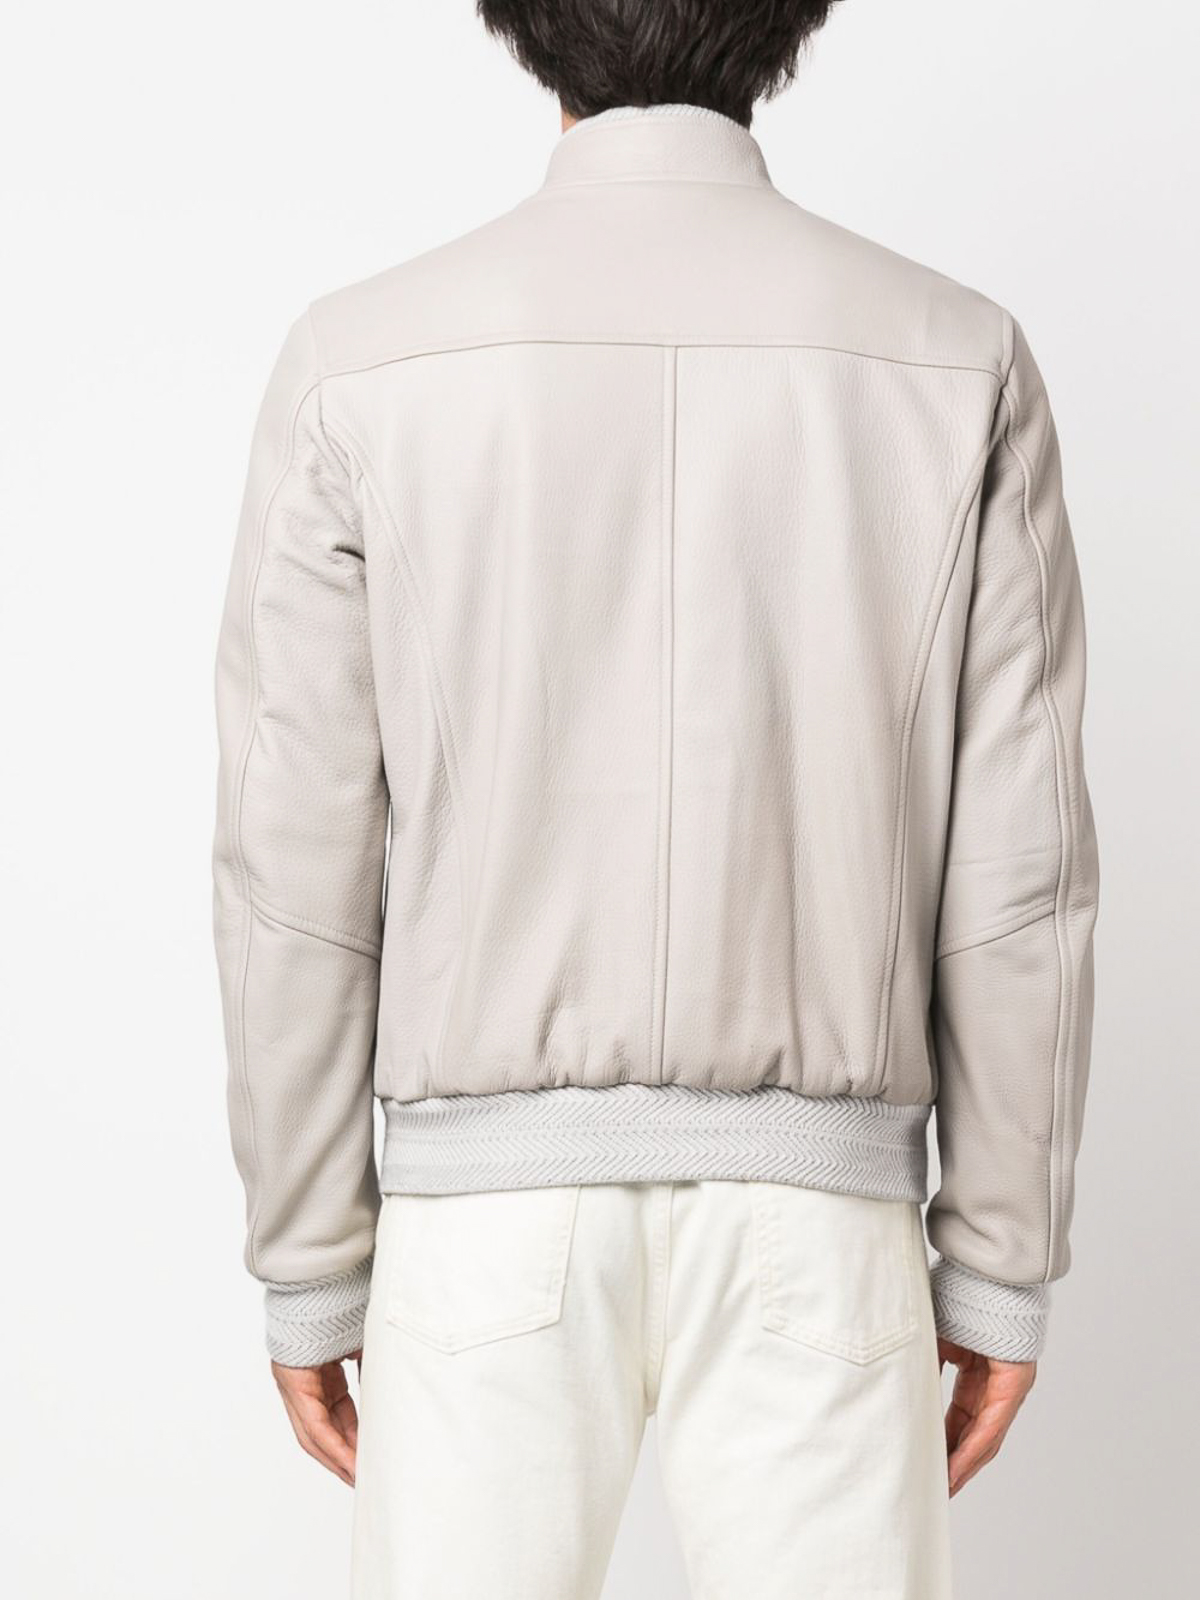 Kired Cloud Reversible Leather Jacket